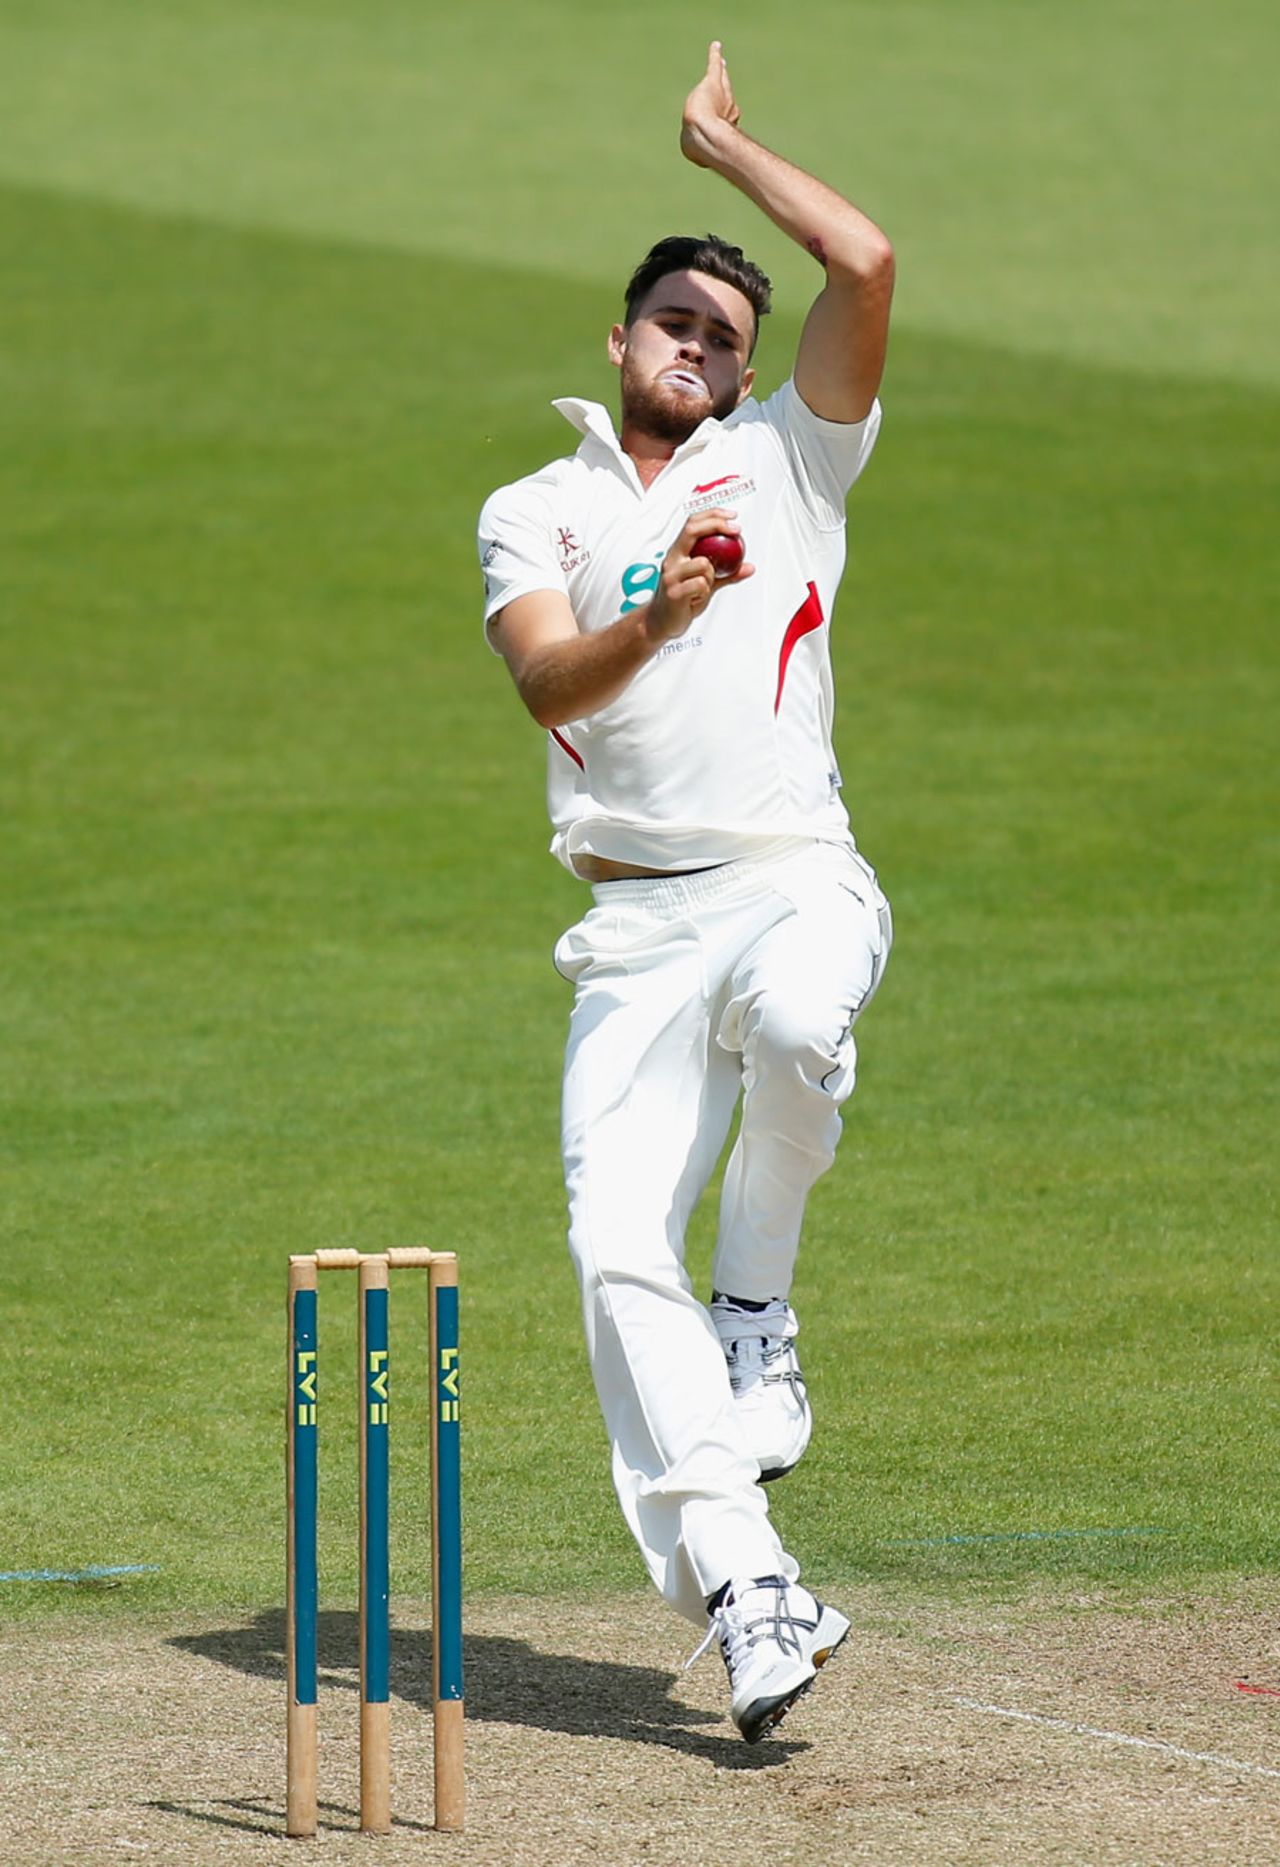 Nathan Buck took the opening wicket, Surrey v Leicestershire, County Championship Division Two, The Oval, 1st day, June 22, 2014